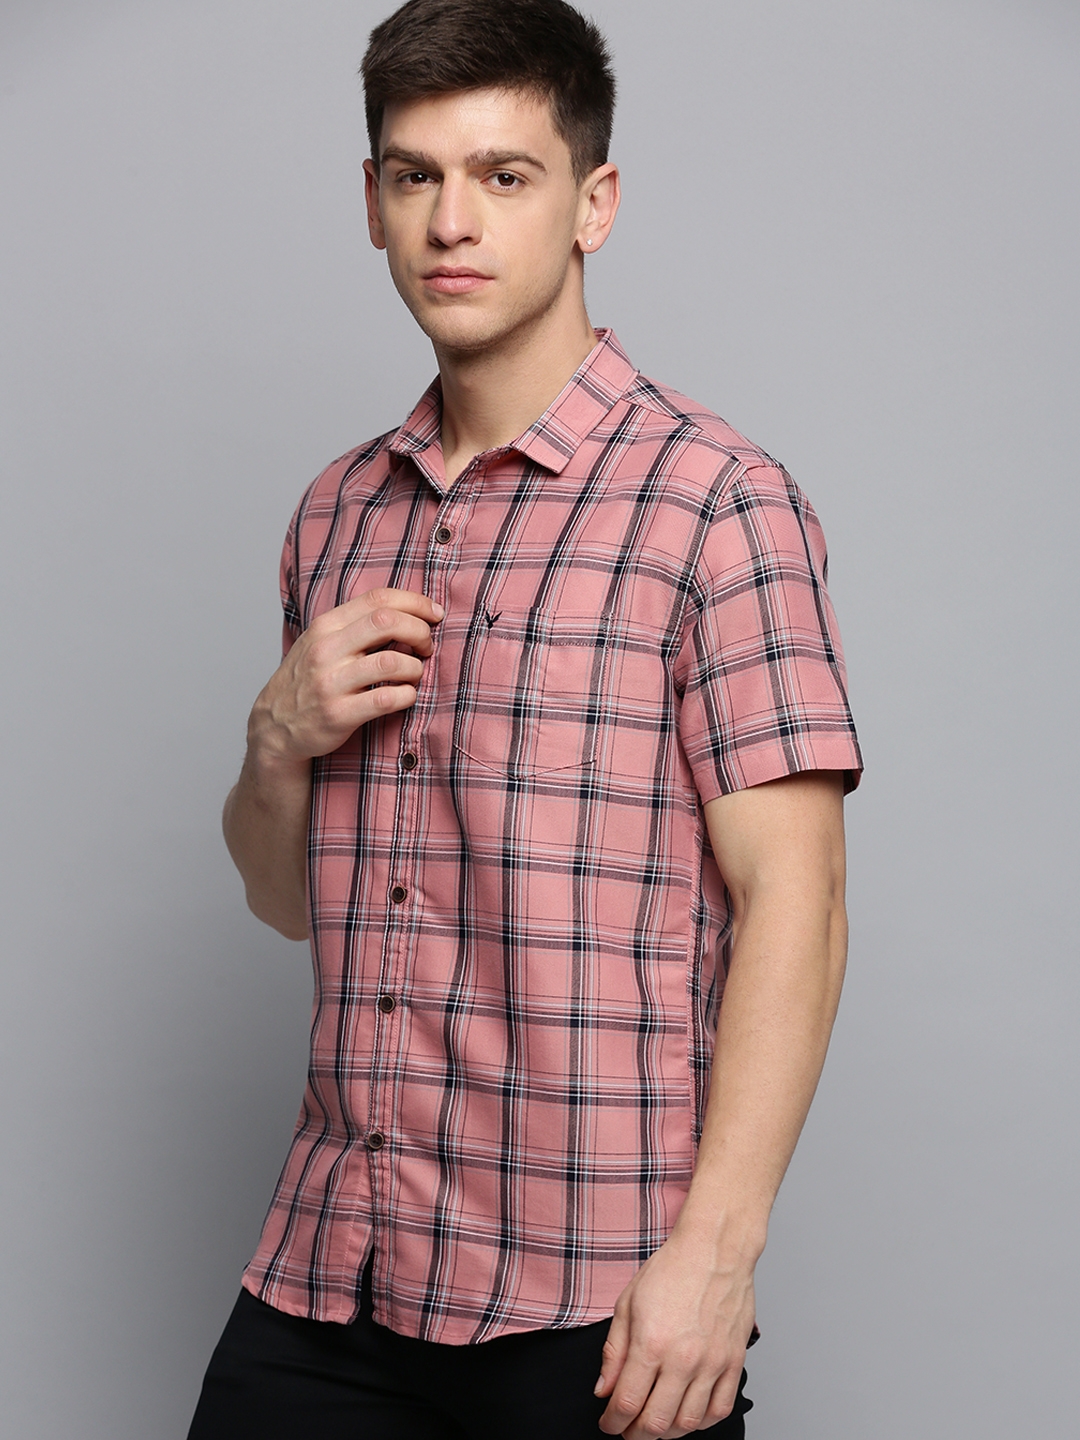 Showoff | SHOWOFF Men's Spread Collar Checked Pink Classic Shirt 2